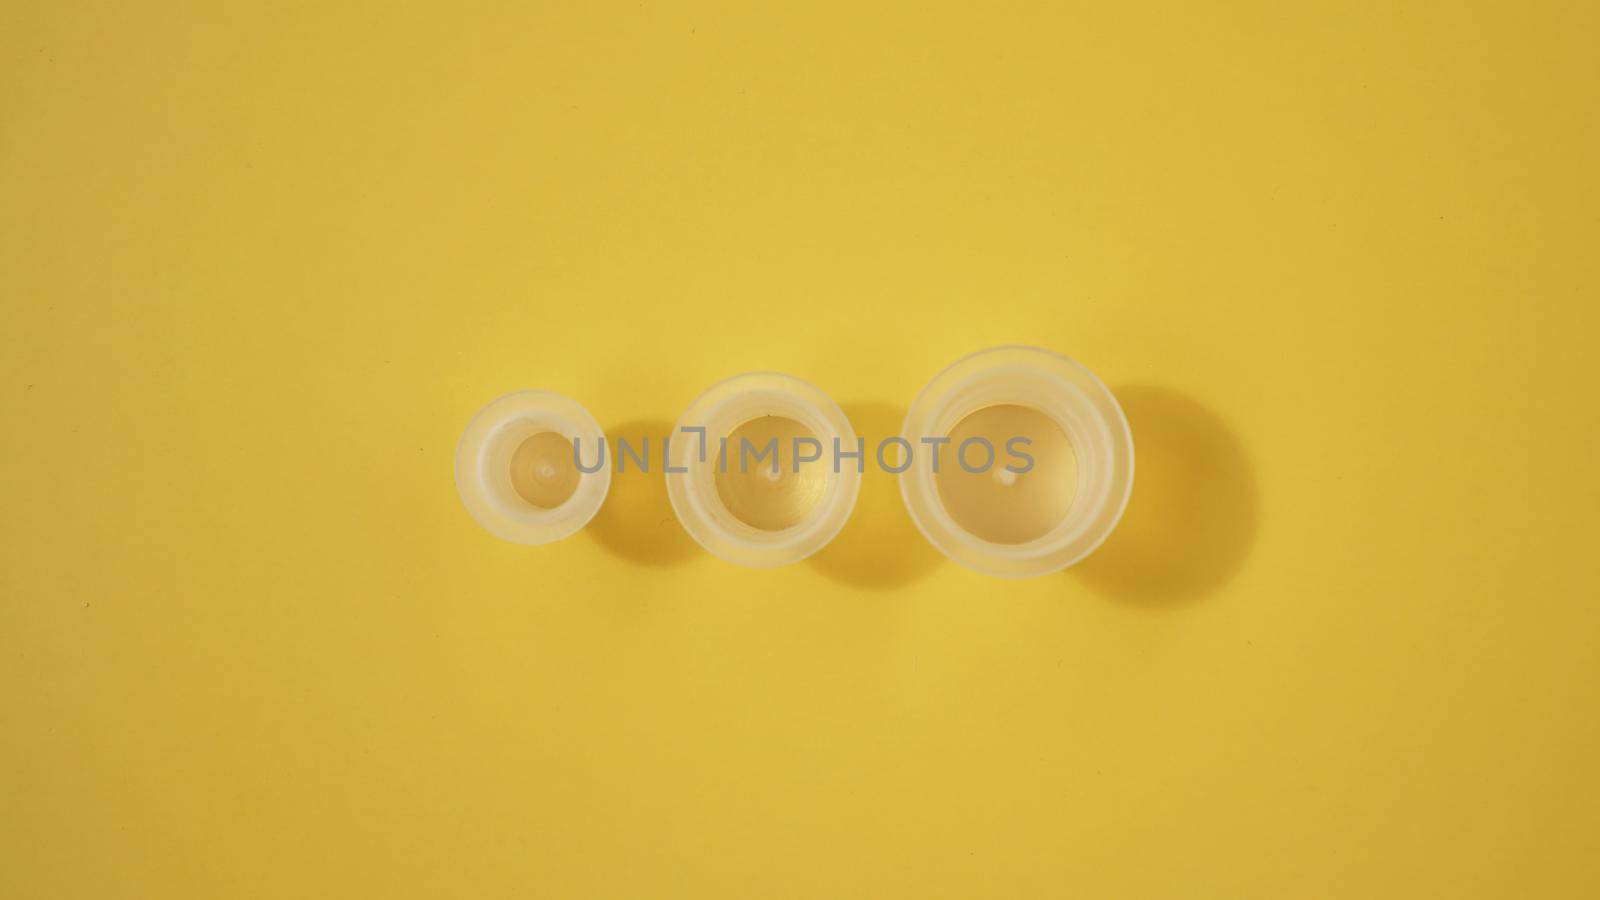 Three ink plastic caps on yellow background - tattoo concept